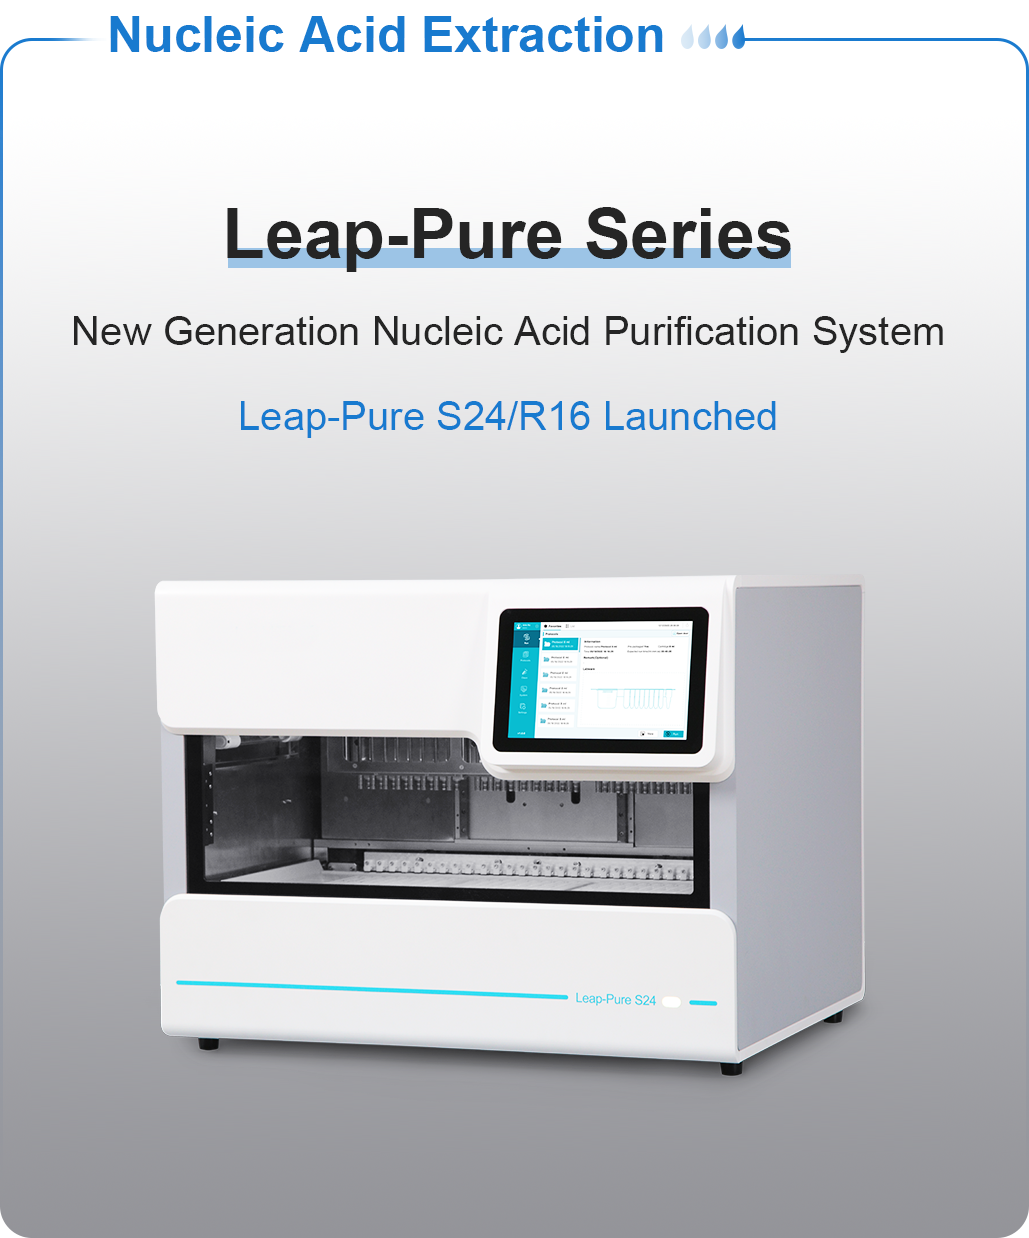 Leap-Pure Series. New Generation Nucleic Acid Purification System. Leap-Pure S24/R16 Launched